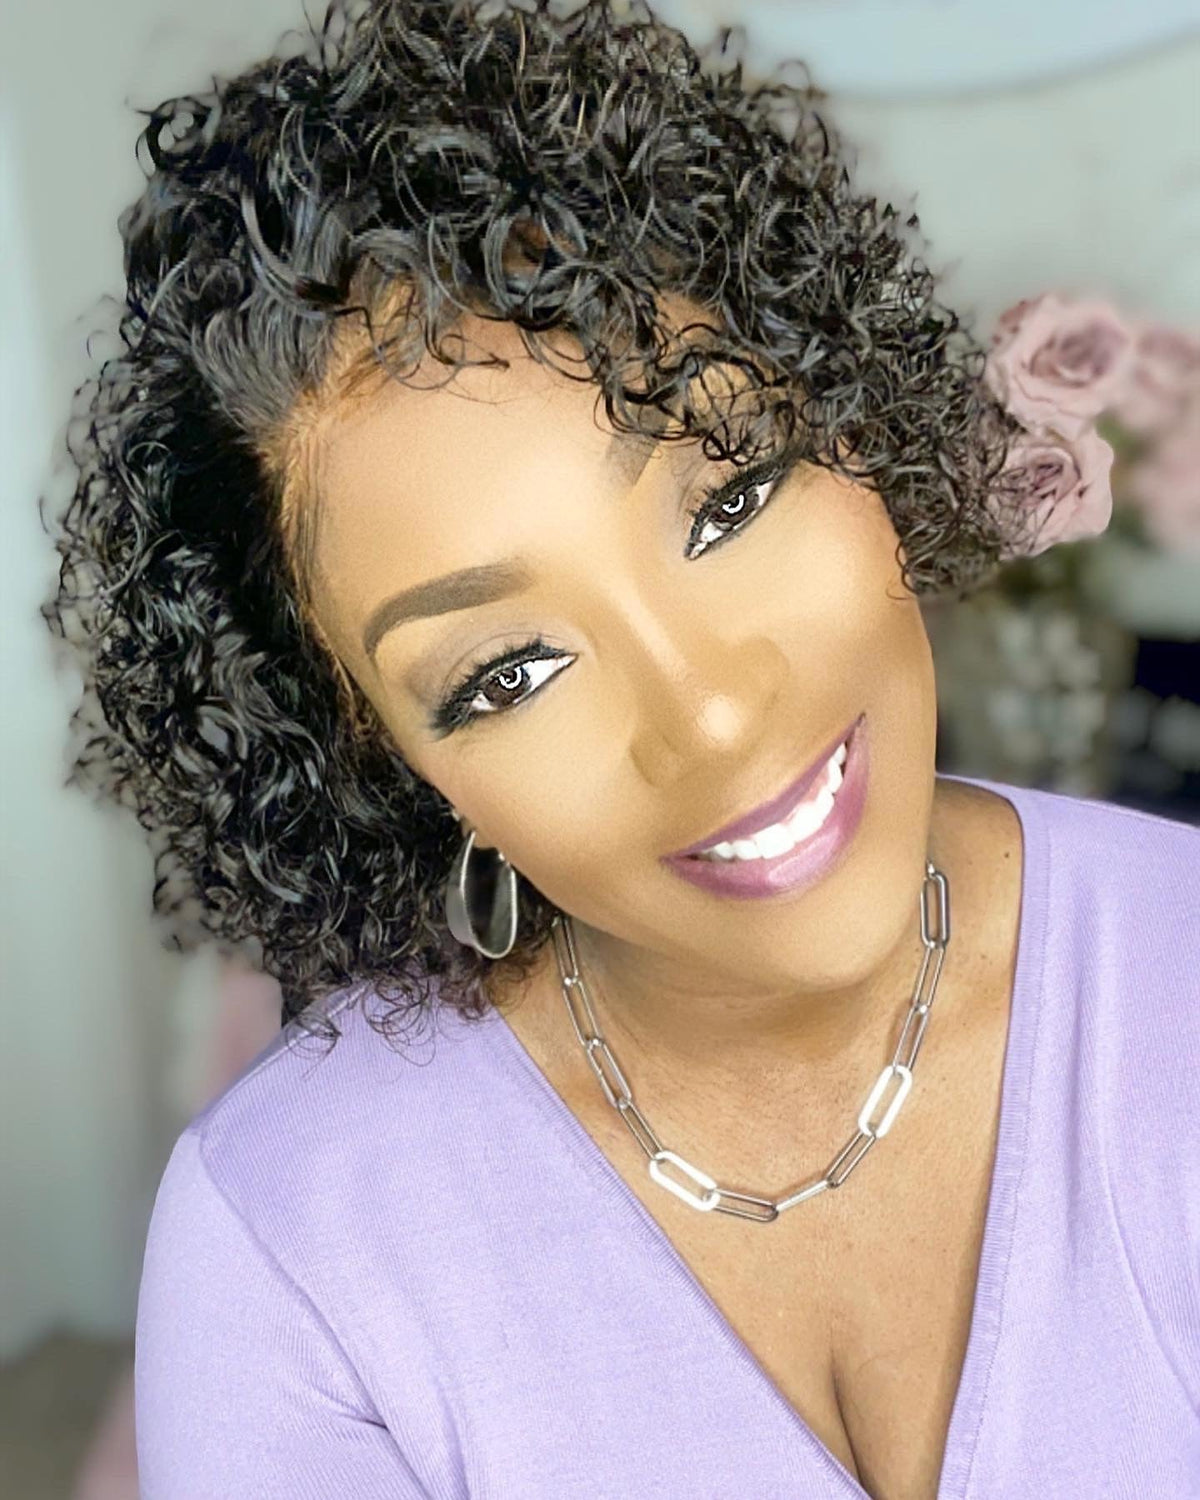 Queen Collection Curly "Wash & Go" Lace Wig